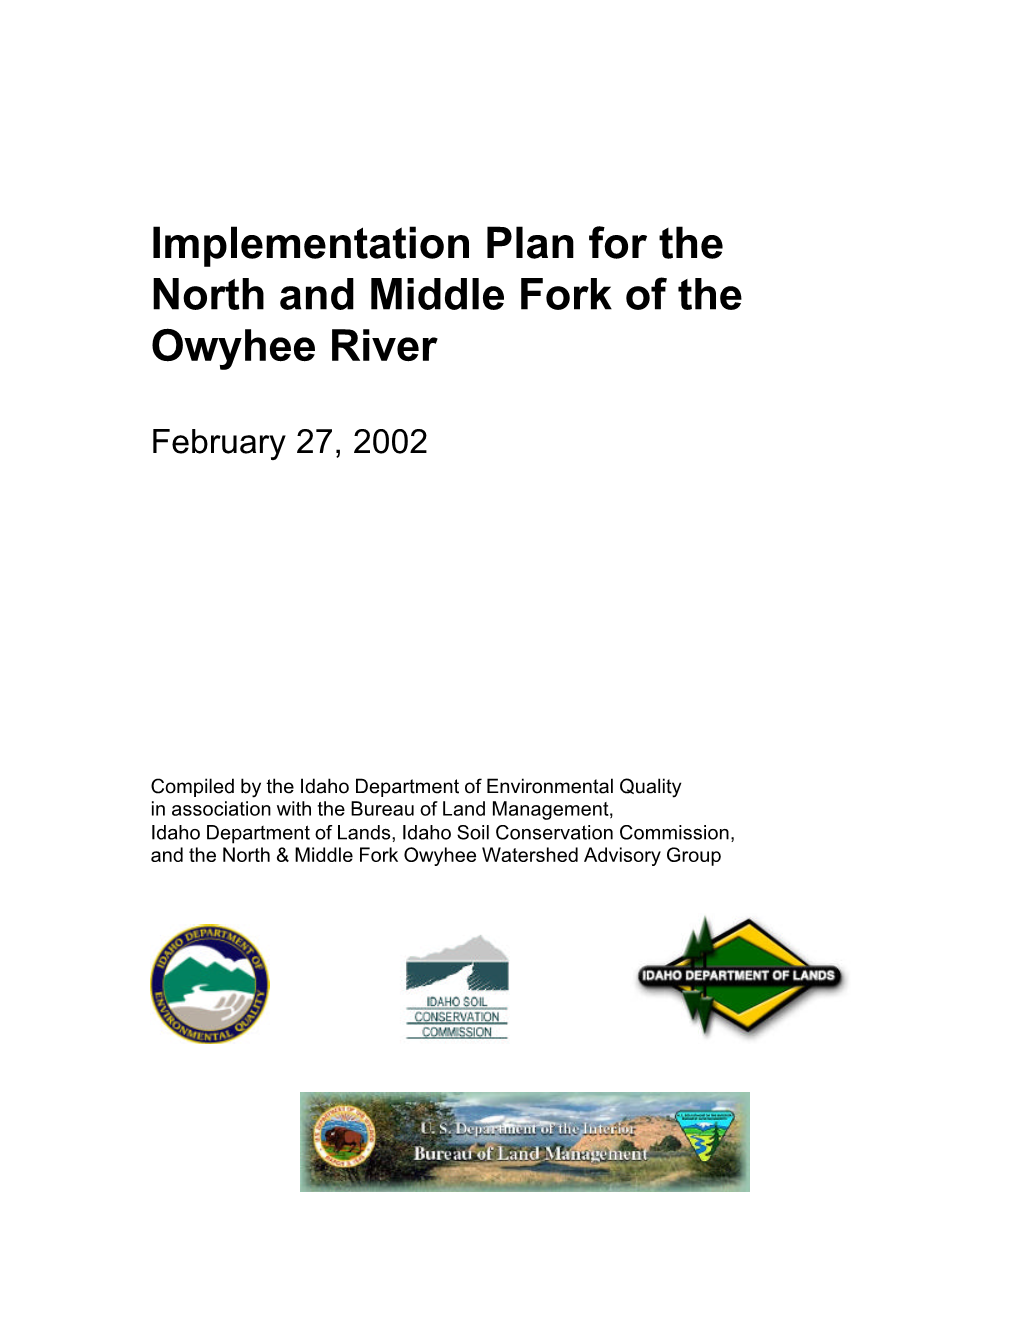 Implementation Plan for the North and Middle Fork of the Owyhee River